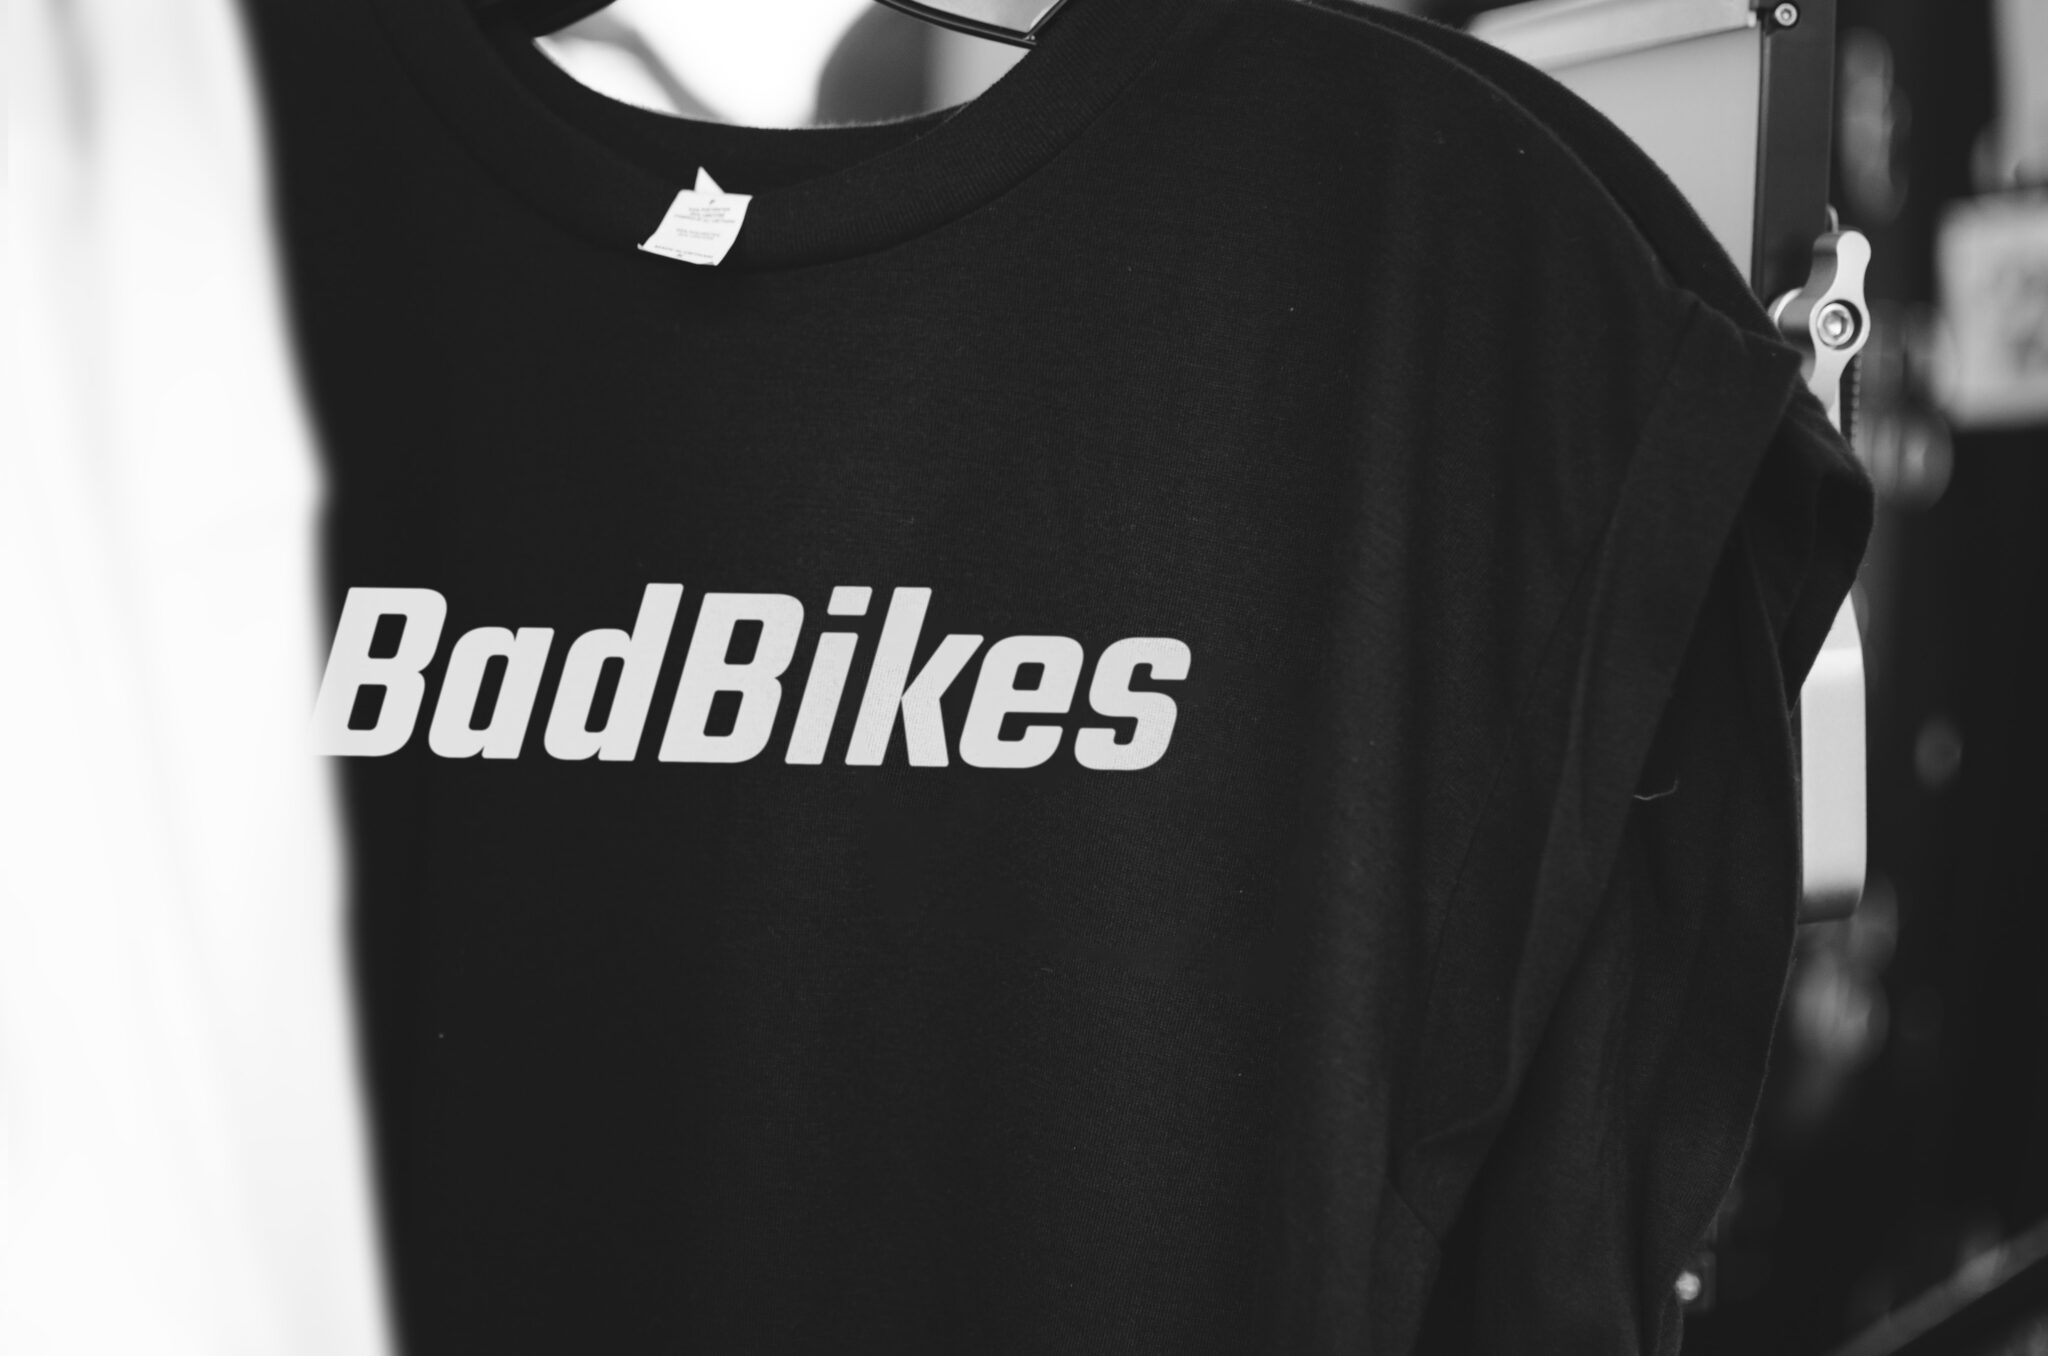 Black and white image of Bad Bikes Berlin logo on a black T-shirt.